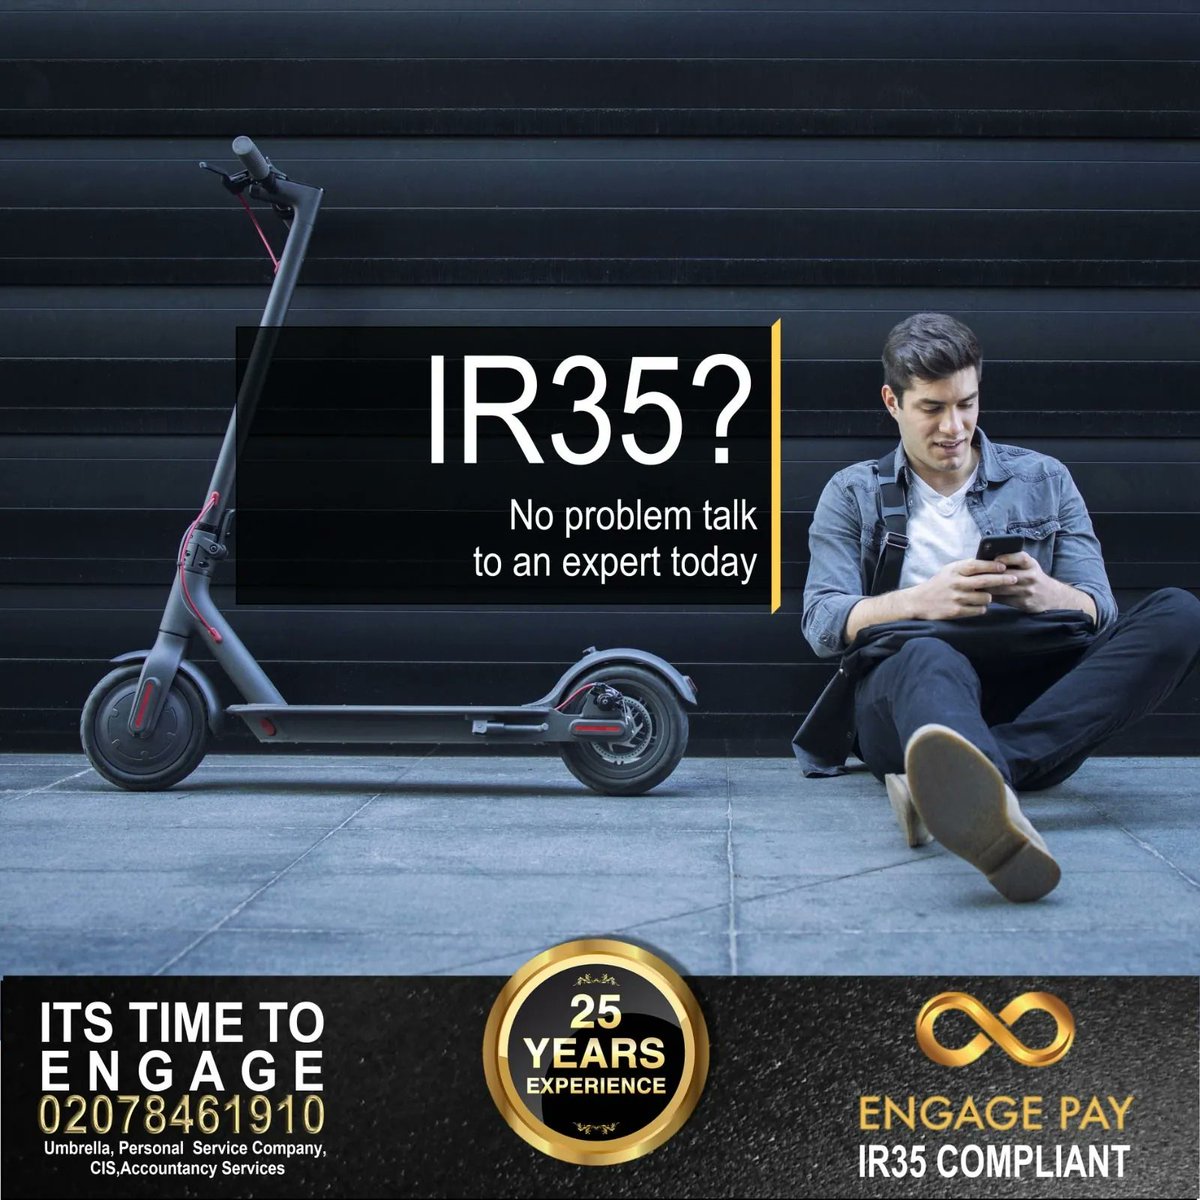 Is IR35 on your mind? Do you fall ito the IR35 category? Do you know what IR35 is?
Our team of experts can offer you a free consultation on your trading options

#essexjobs #manchesterjobs #contractors #ir35 #loancharge #londonjobs #contractorjobs #recruiters #ukjobs